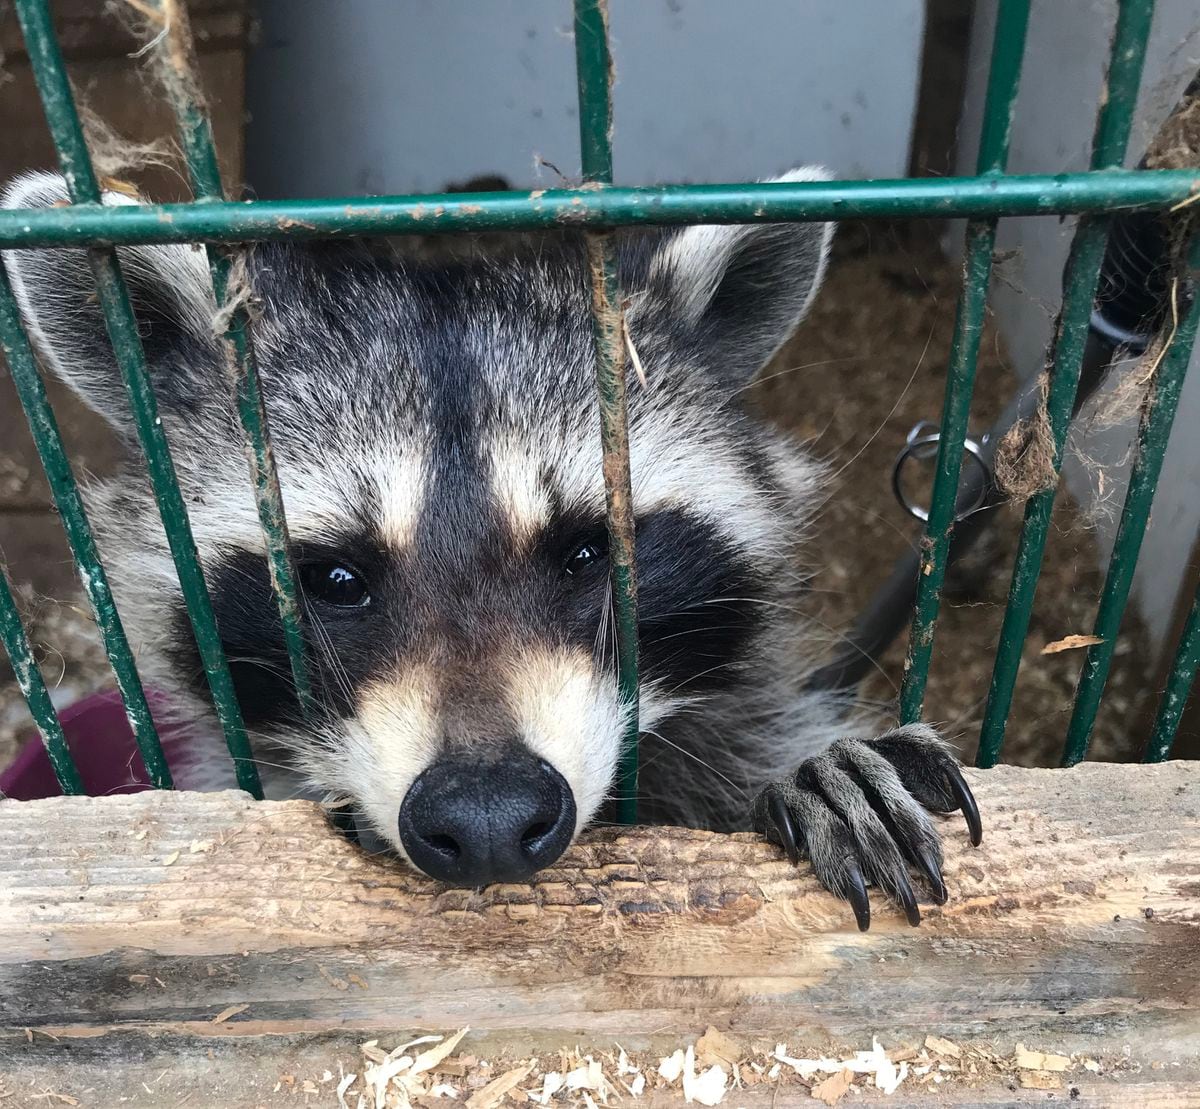 A photo from when the raccoons were found at Kevin Bramwell's illegal puppy farm